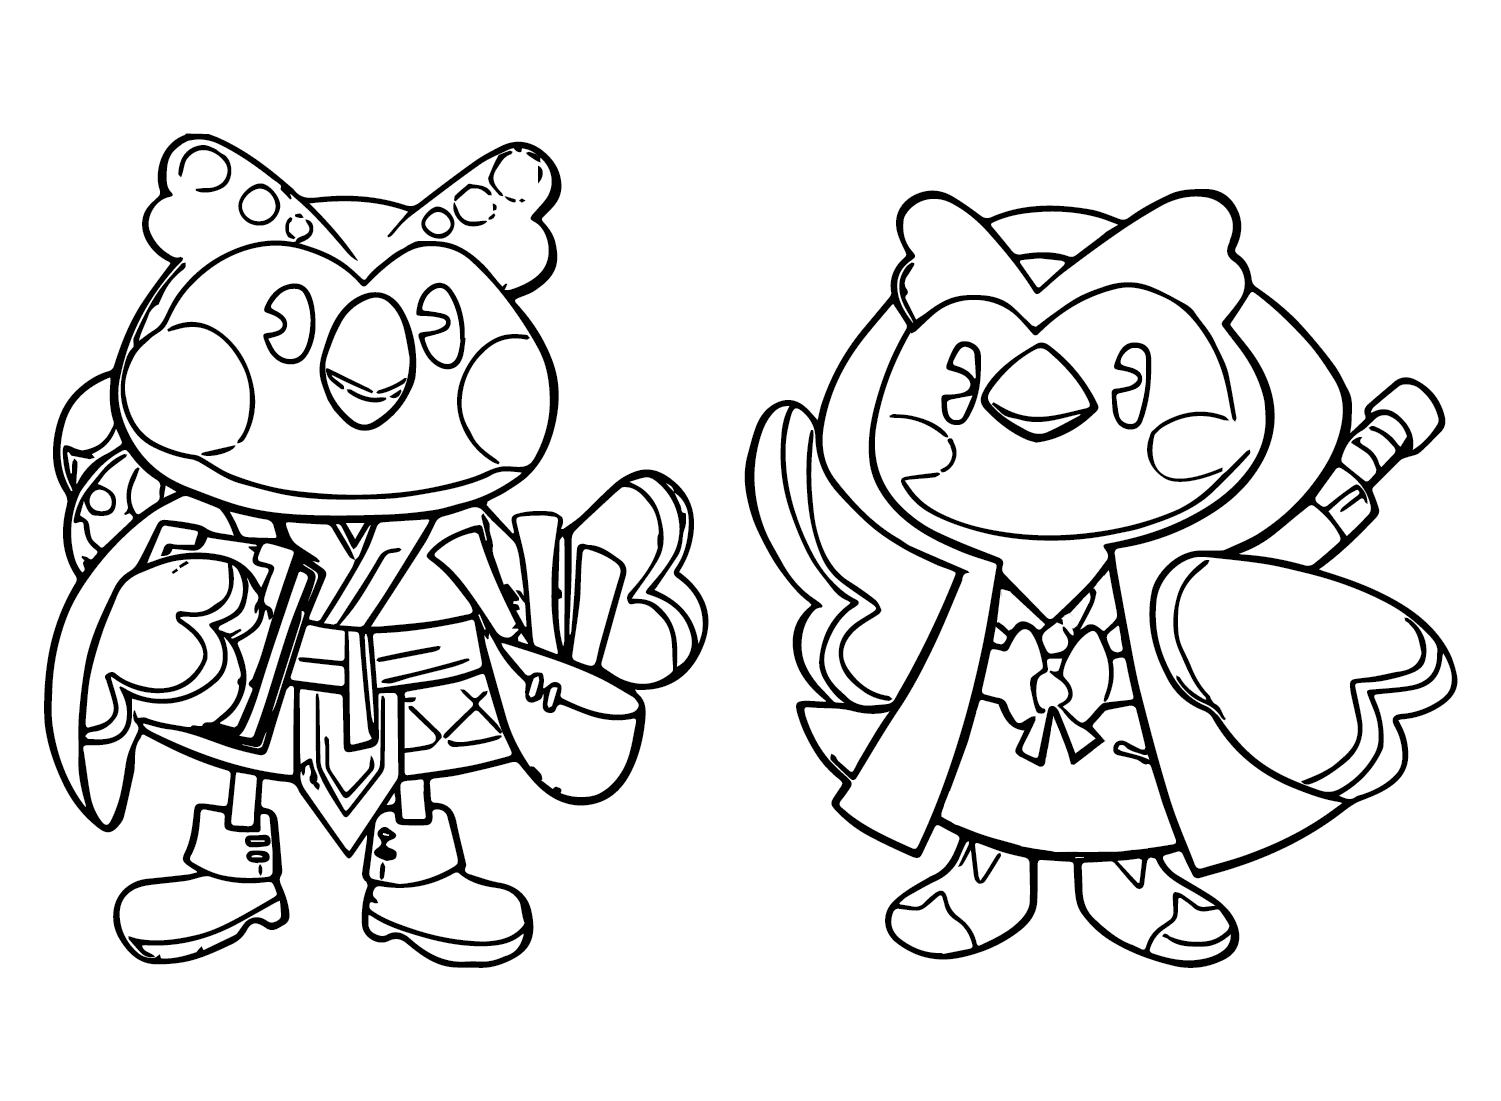 Blathers Coloring Pages Animal Crossing Coloring Pages Páginas para